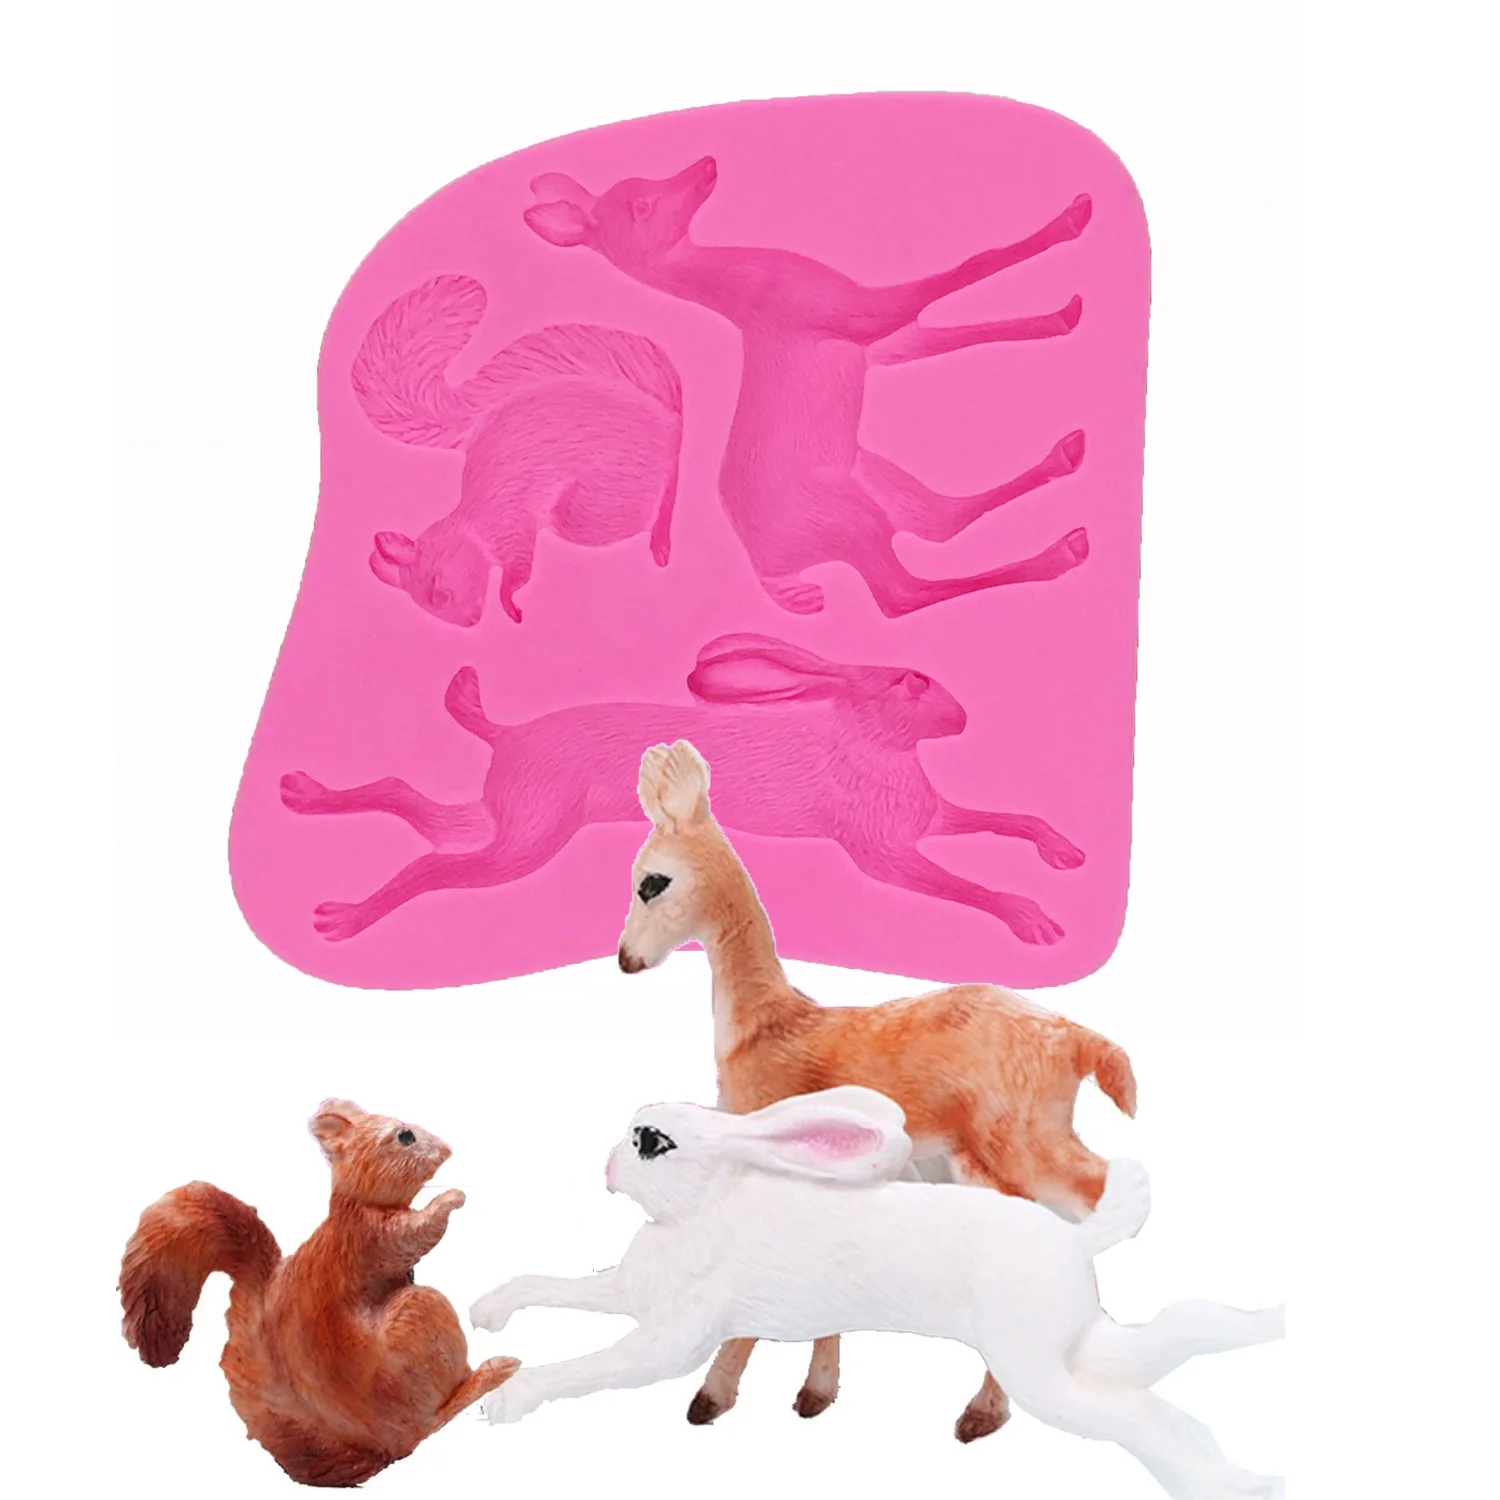 Squirrel Deer Bunny Animal Silicone Mold Fondant Mould Cake Decorating 